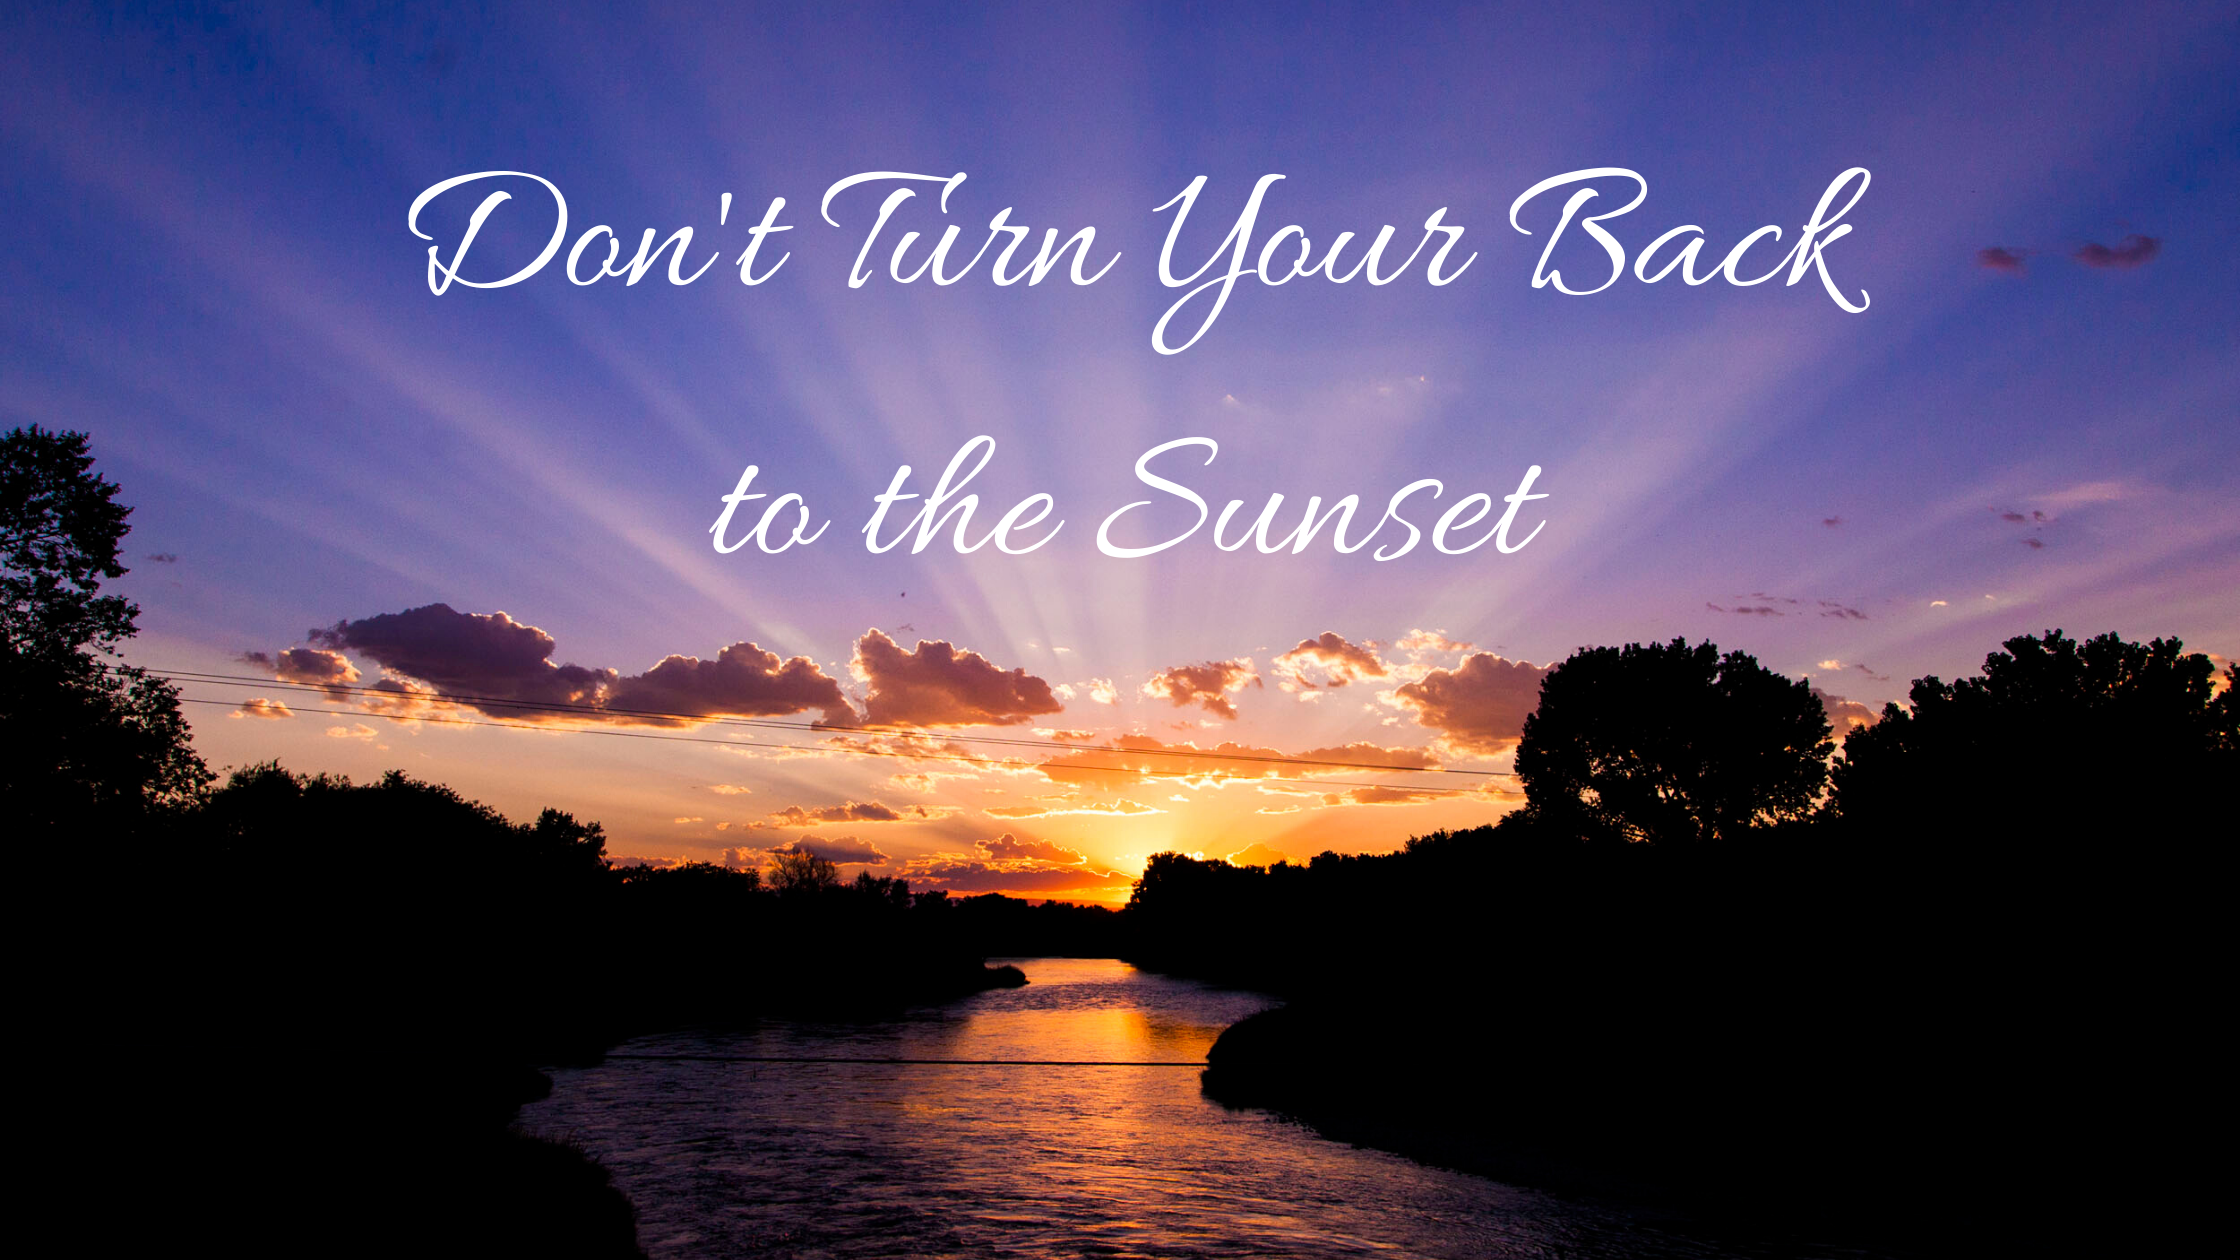 Don't Turn Your Back to the Sunset blog title on sunset background